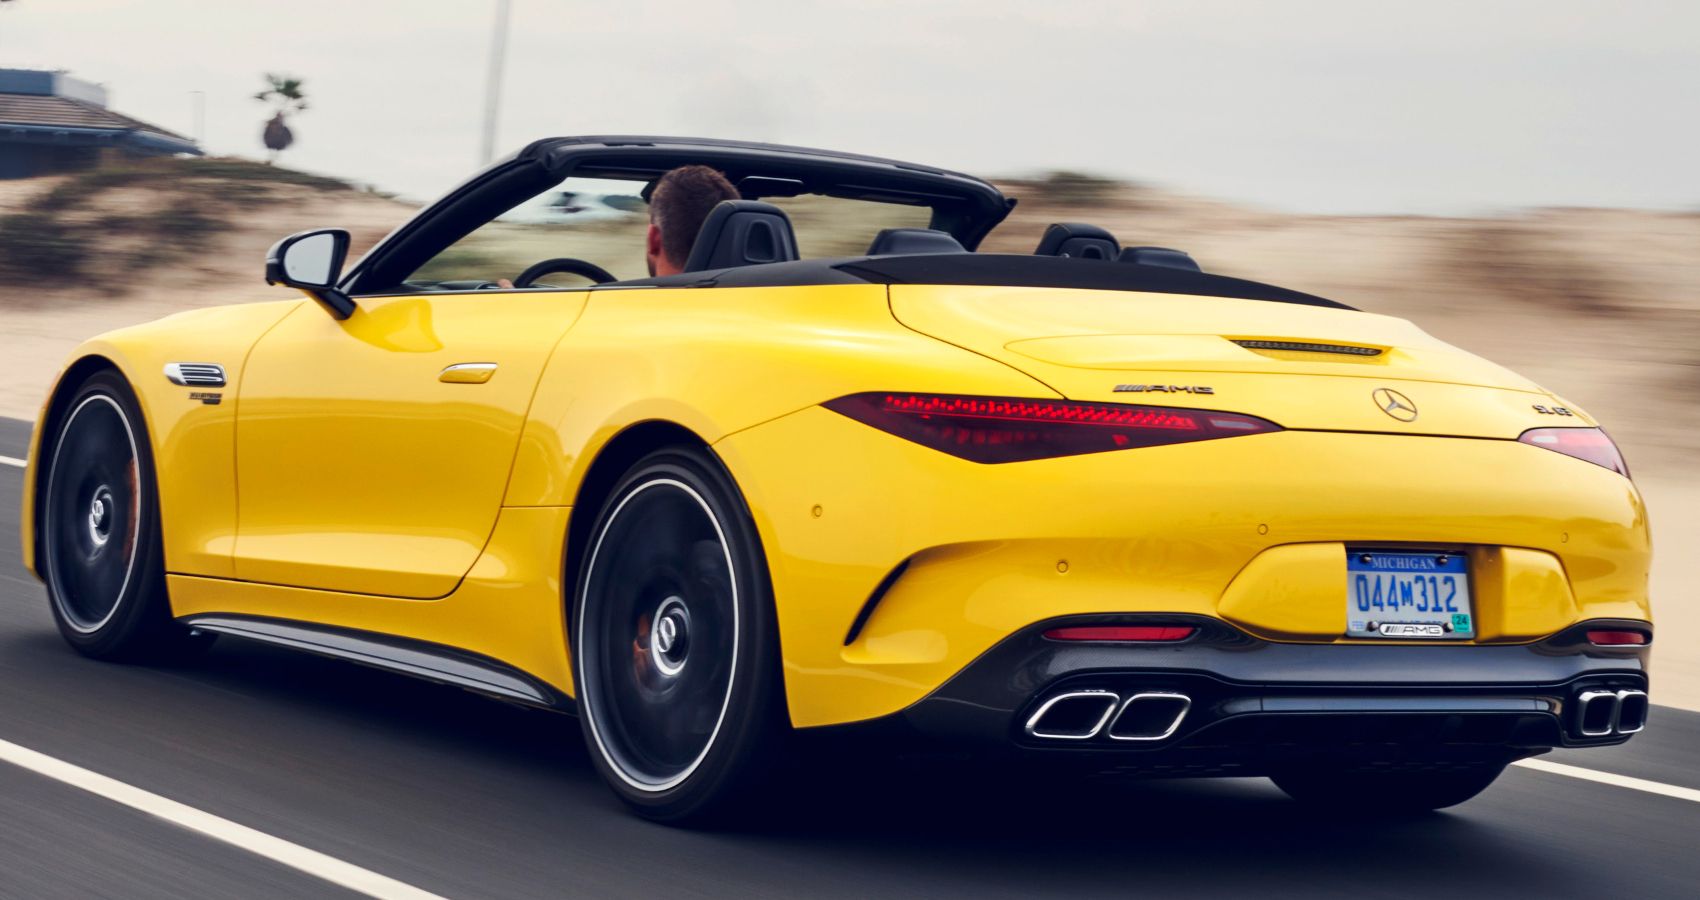 2022 Mercedes-AMG SL 63 Roadster side view